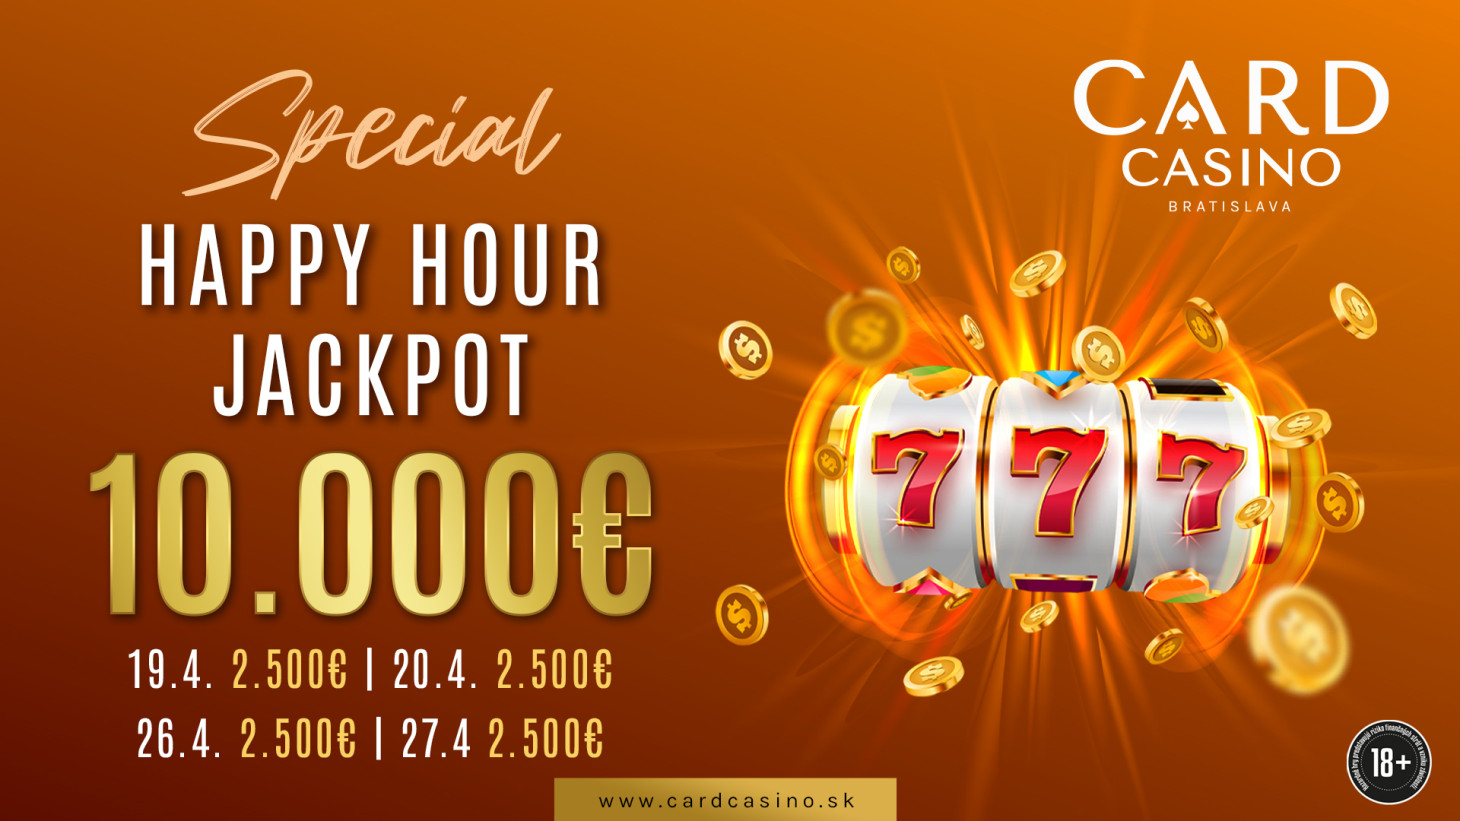 Happy Hour Jackpot offers €10,000 in prizes!